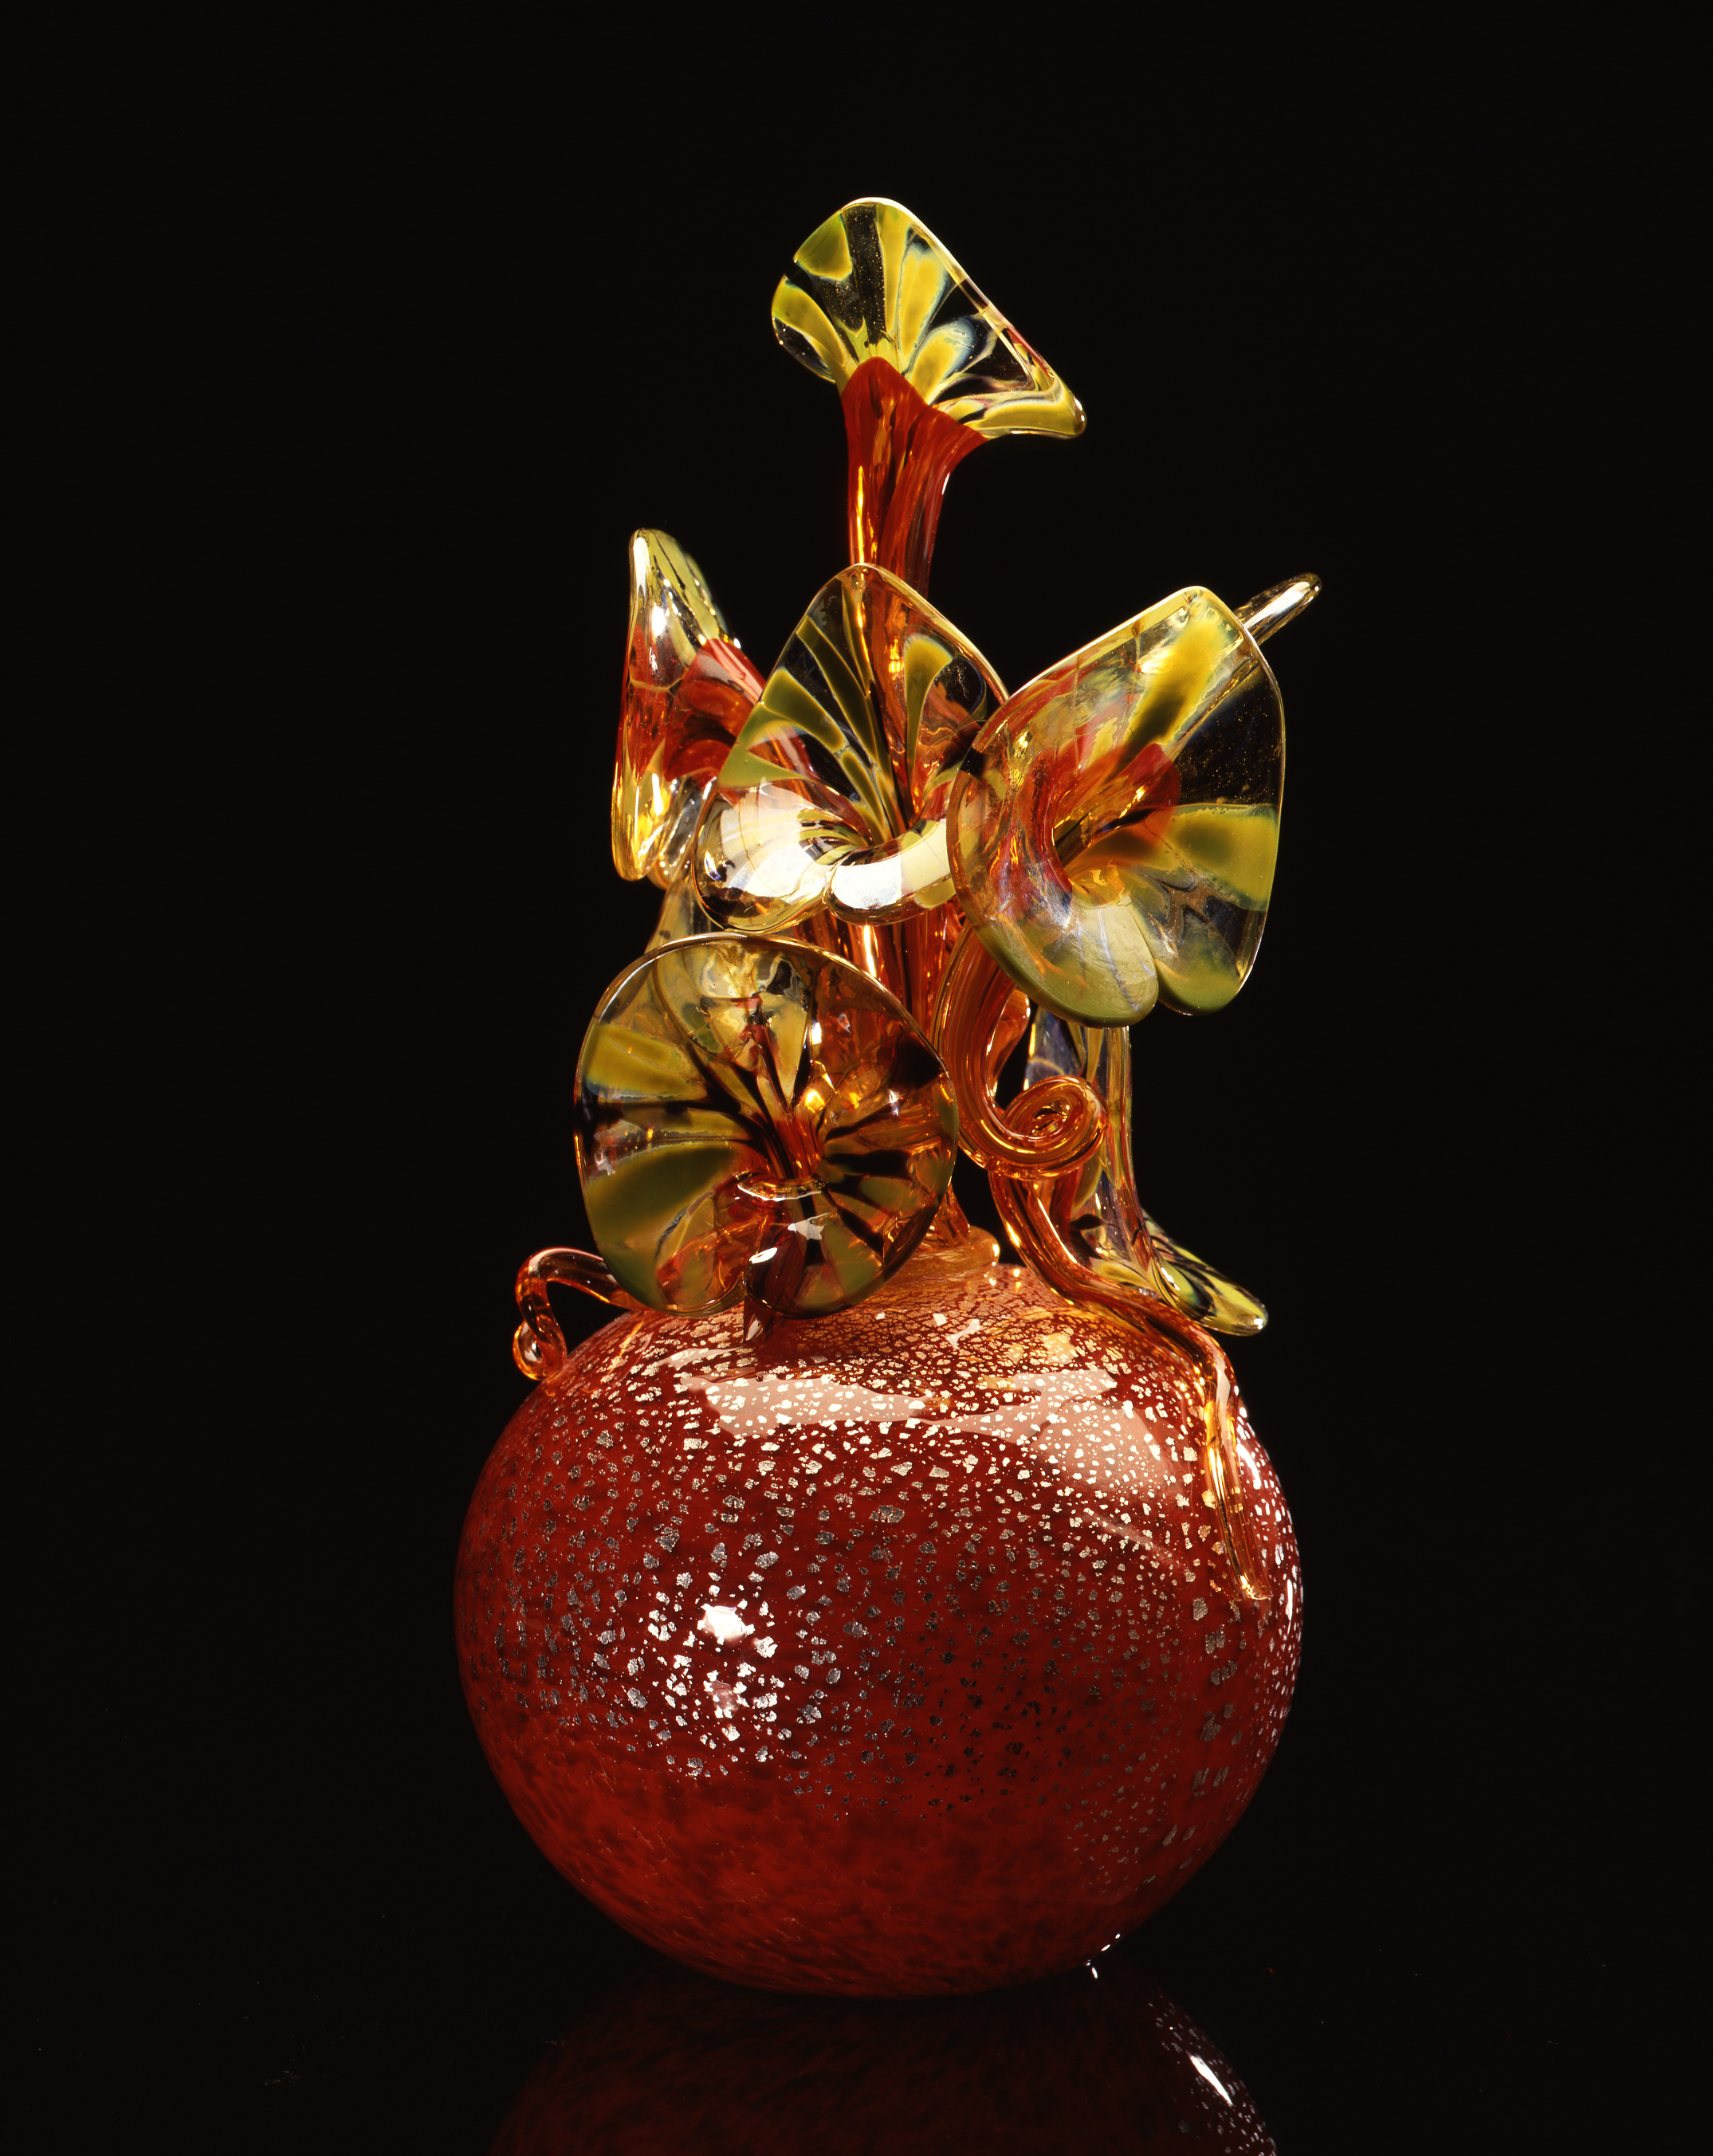  Dale Chihuly,  Red Speckles Piccolo Venetian with Red Coild and Green Lilies&nbsp; (1994, glass, 12 x 5 x 6 inches) 